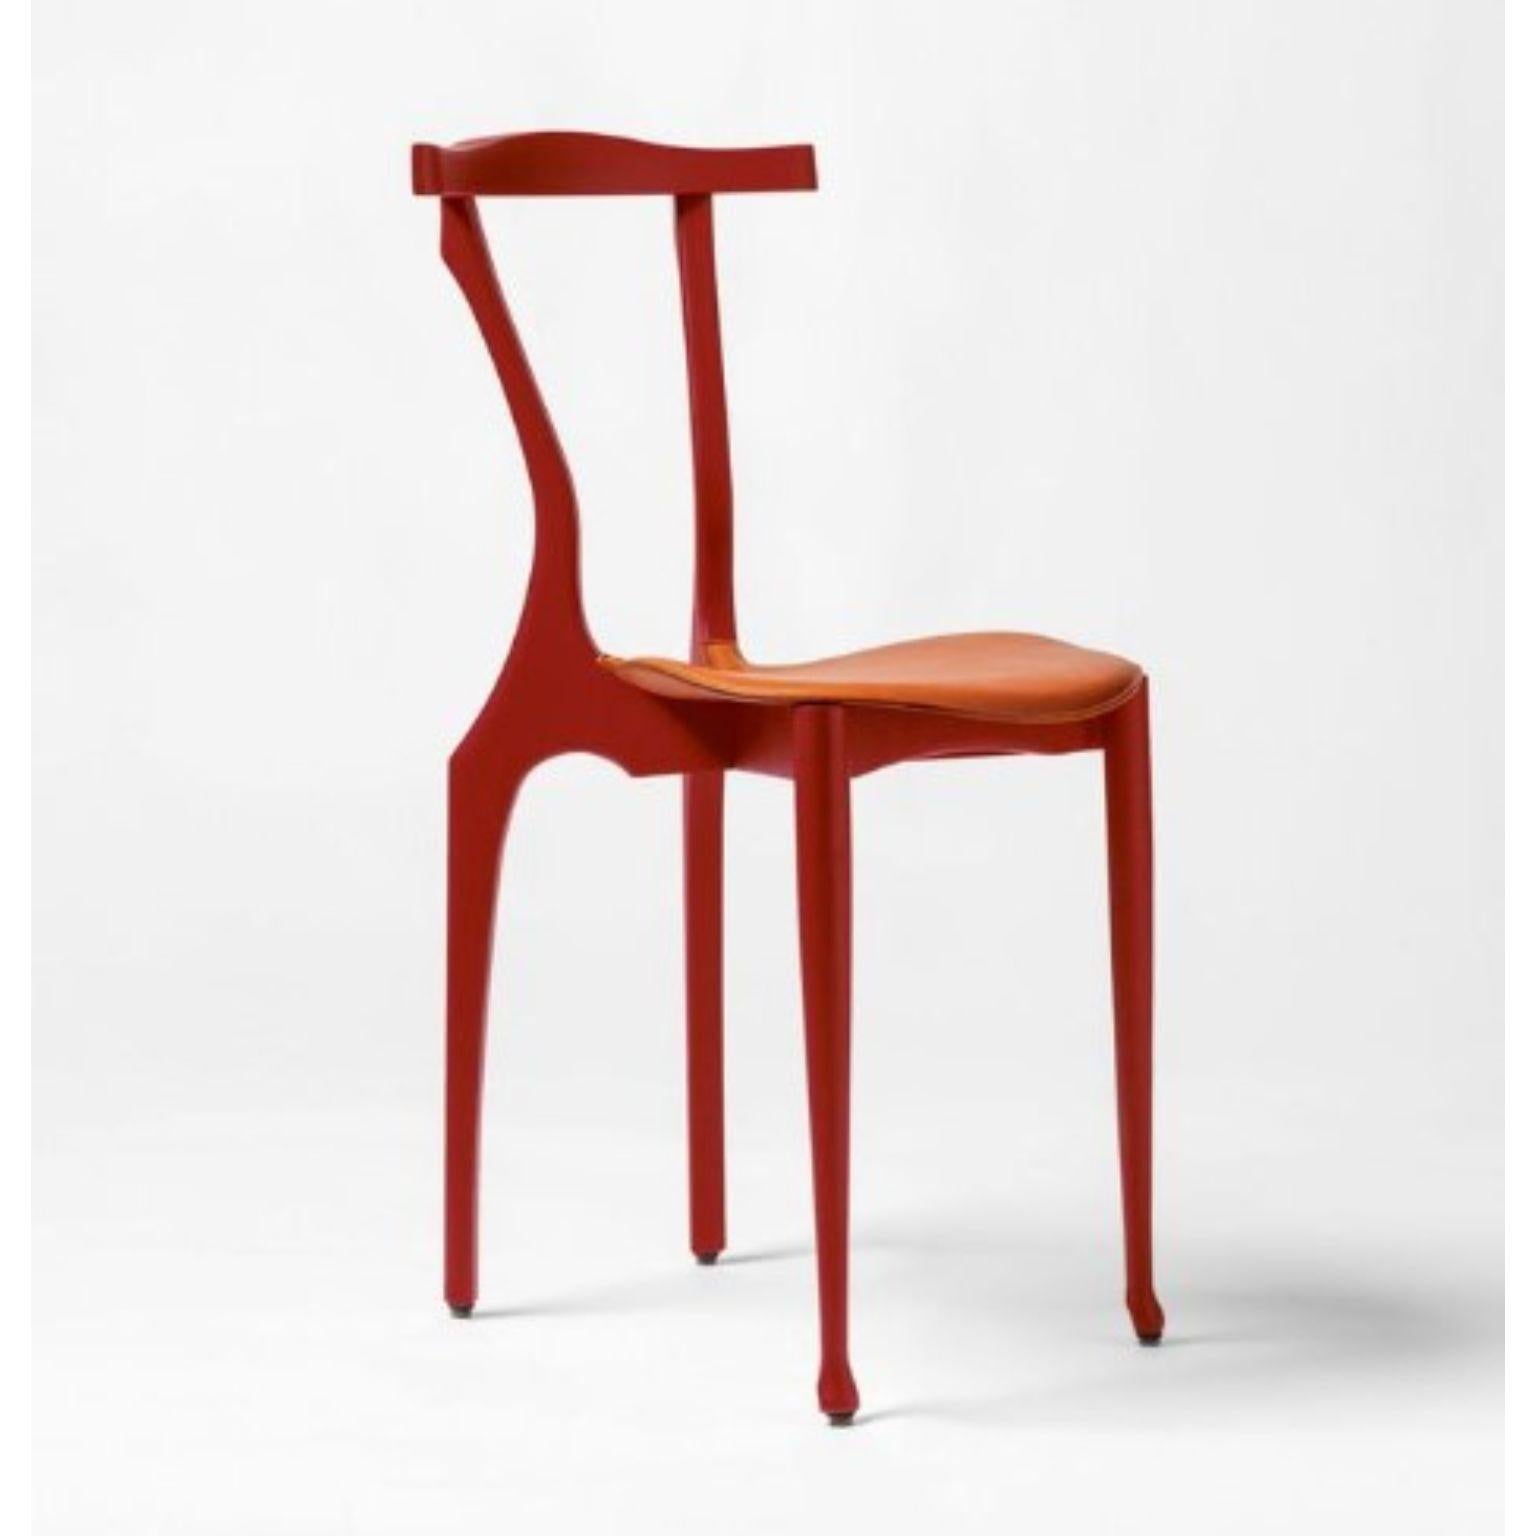 Gaulinetta coral red chair by Oscar Tusquets
Dimensions: D40 x W52 x H 83 cm.
Materials: ash wood

The Gaulino chair was designed in 1987. BD re-edited it, improving it in 2010. It’s probably one of the best designs by Oscar Tusquets. Even